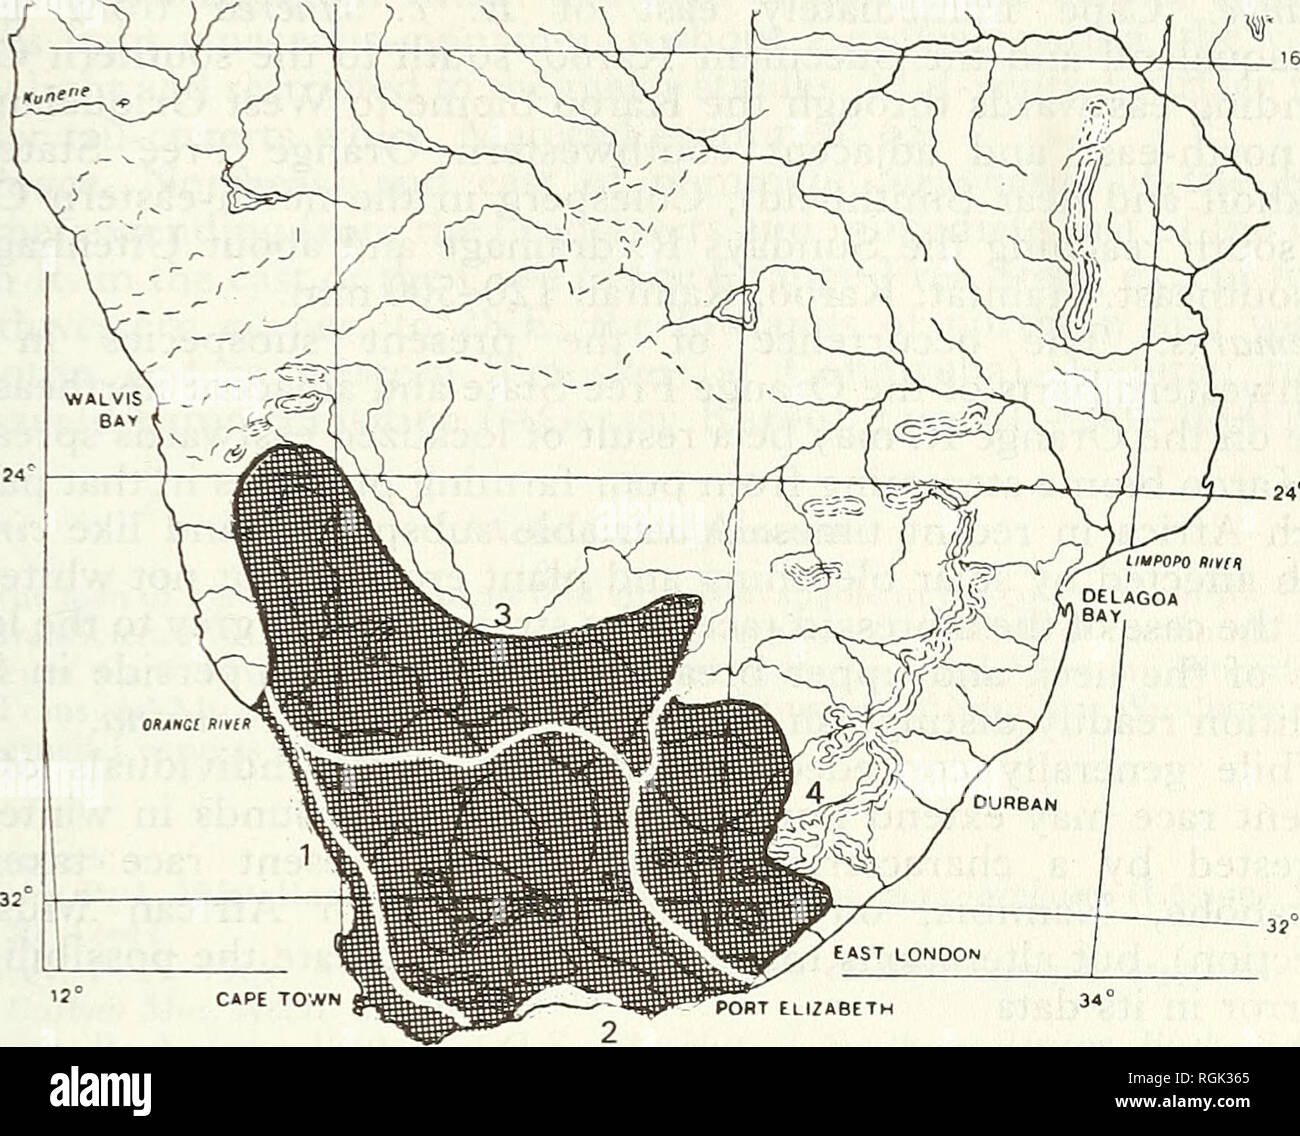 . Bulletin of the British Ornithologists' Club. Birds. P. A. Clancev 227 Bull. B.O.C. 1994 114(4). Figure 1. Sketch-map of the Southern African Subregion showing the distribution of the Karoo Scrub-Robin and the disposition of its four subspecies: 1, Erythropygia coryphoeus cinerea; 2, E. c. coryphoeus; 3, E. c. abotti; 4, E. c. eurina. Range. Extends narrowly along the coast from southwestern Namibia and the mouth of the Orange R. to the coastlands of Little Namaqualand, Cape Province, south to the Cape of Good Hope, thence southeast to Cape Agulhas and the Bredasdorp district. Intergrades ir Stock Photo